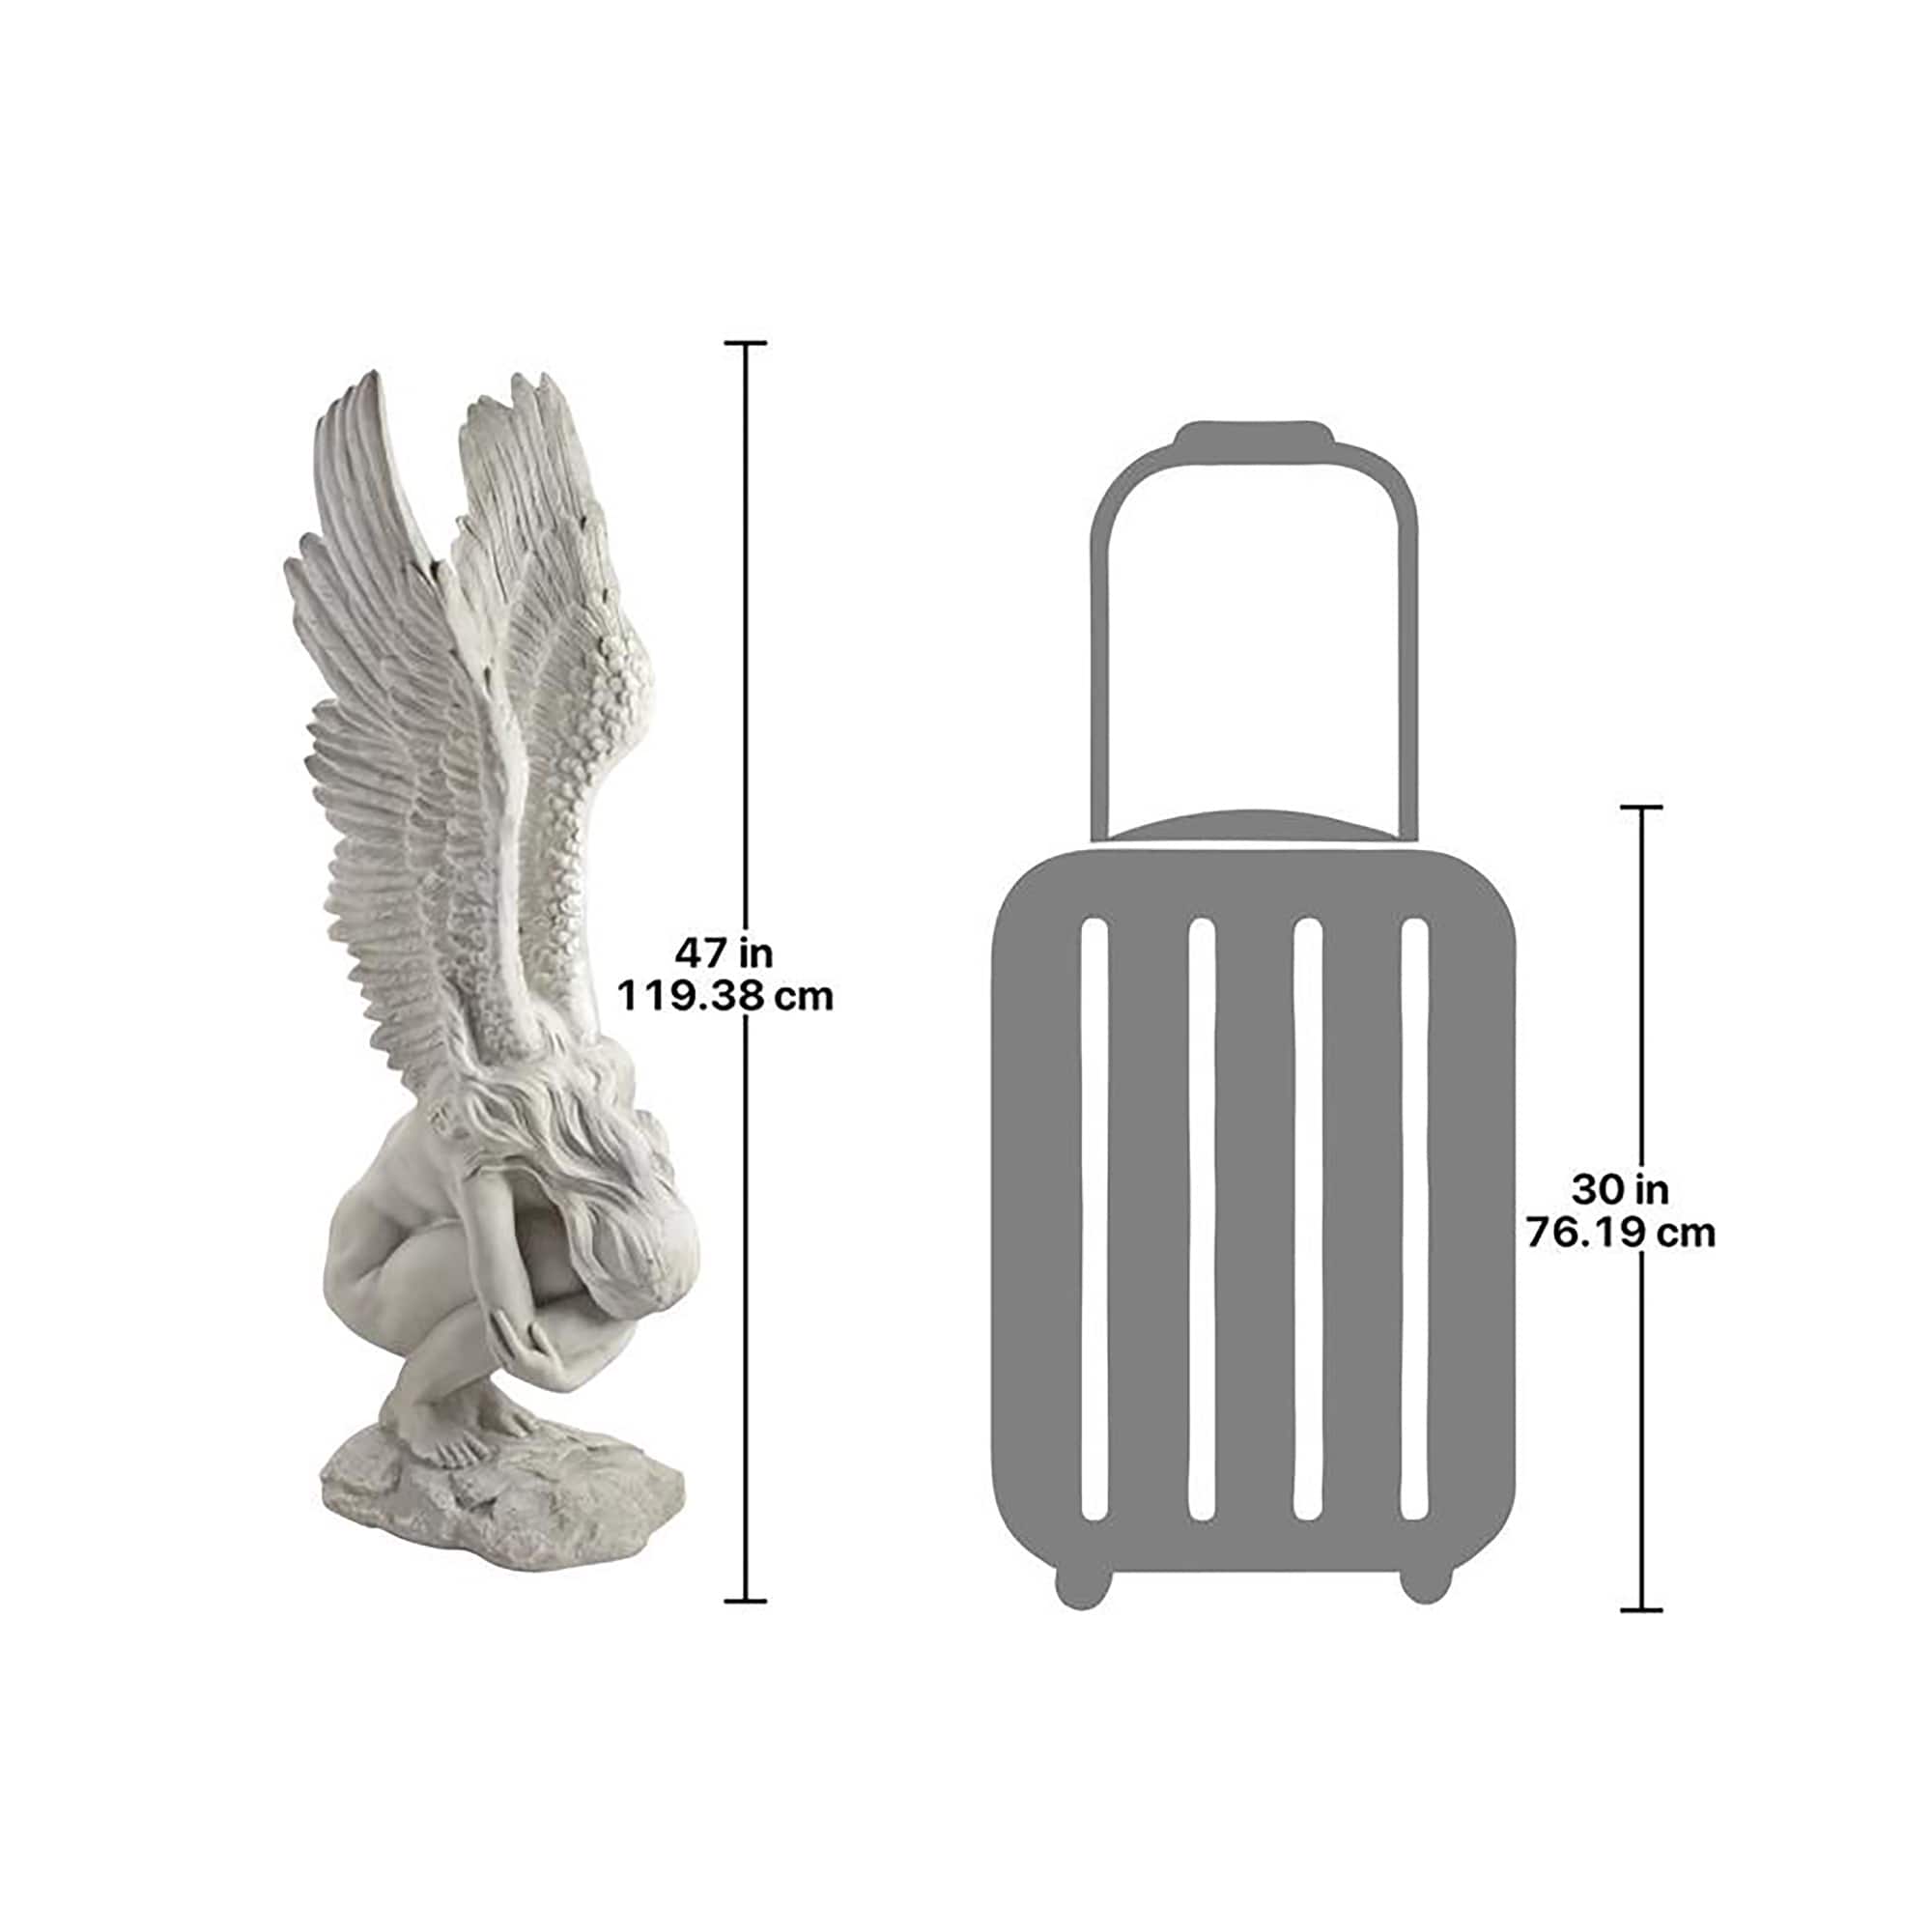 Remembrance and Redemption Angel Statues - Design Toscano